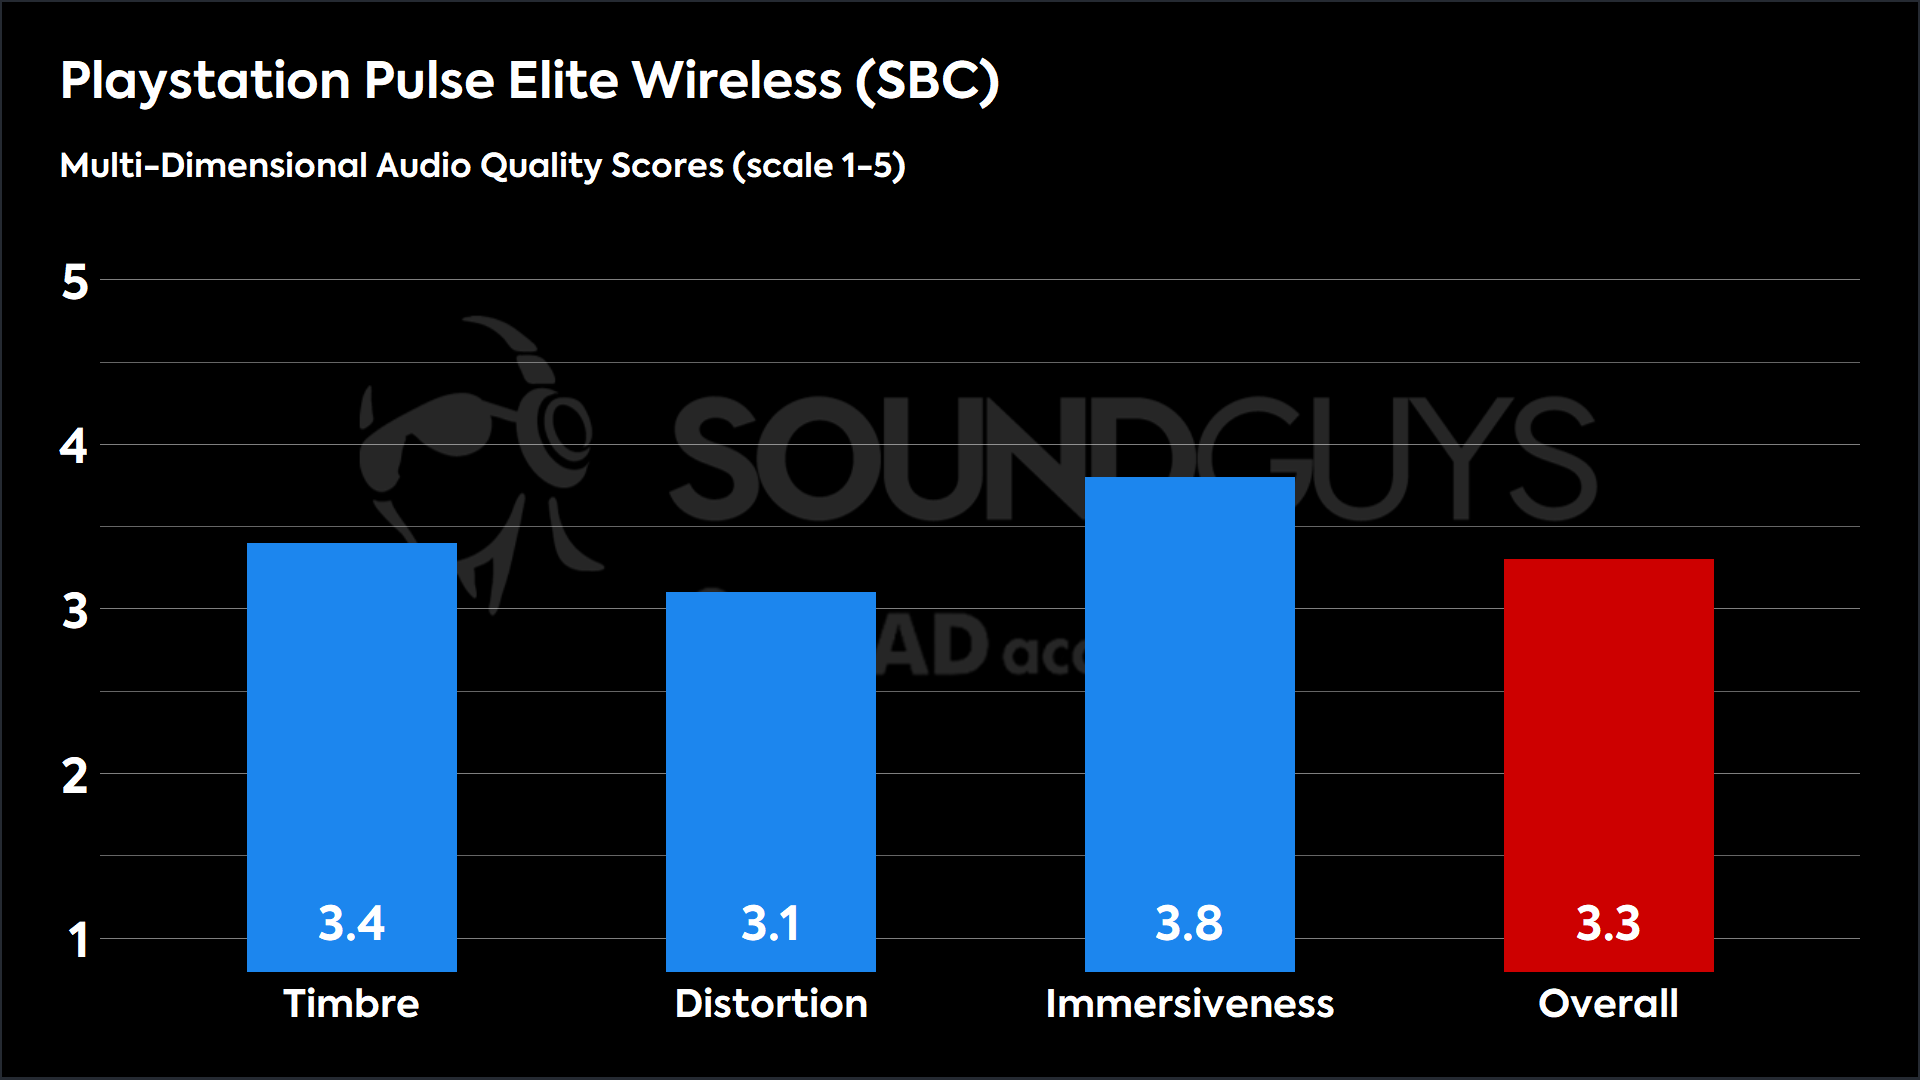 This chart shows the MDAQS results for the Playstation Pulse Elite Wireless in SBC mode. The Timbre score is 3.4, The Distortion score is 3.1, the Immersiveness score is 3.8, and the Overall Score is 3.3).